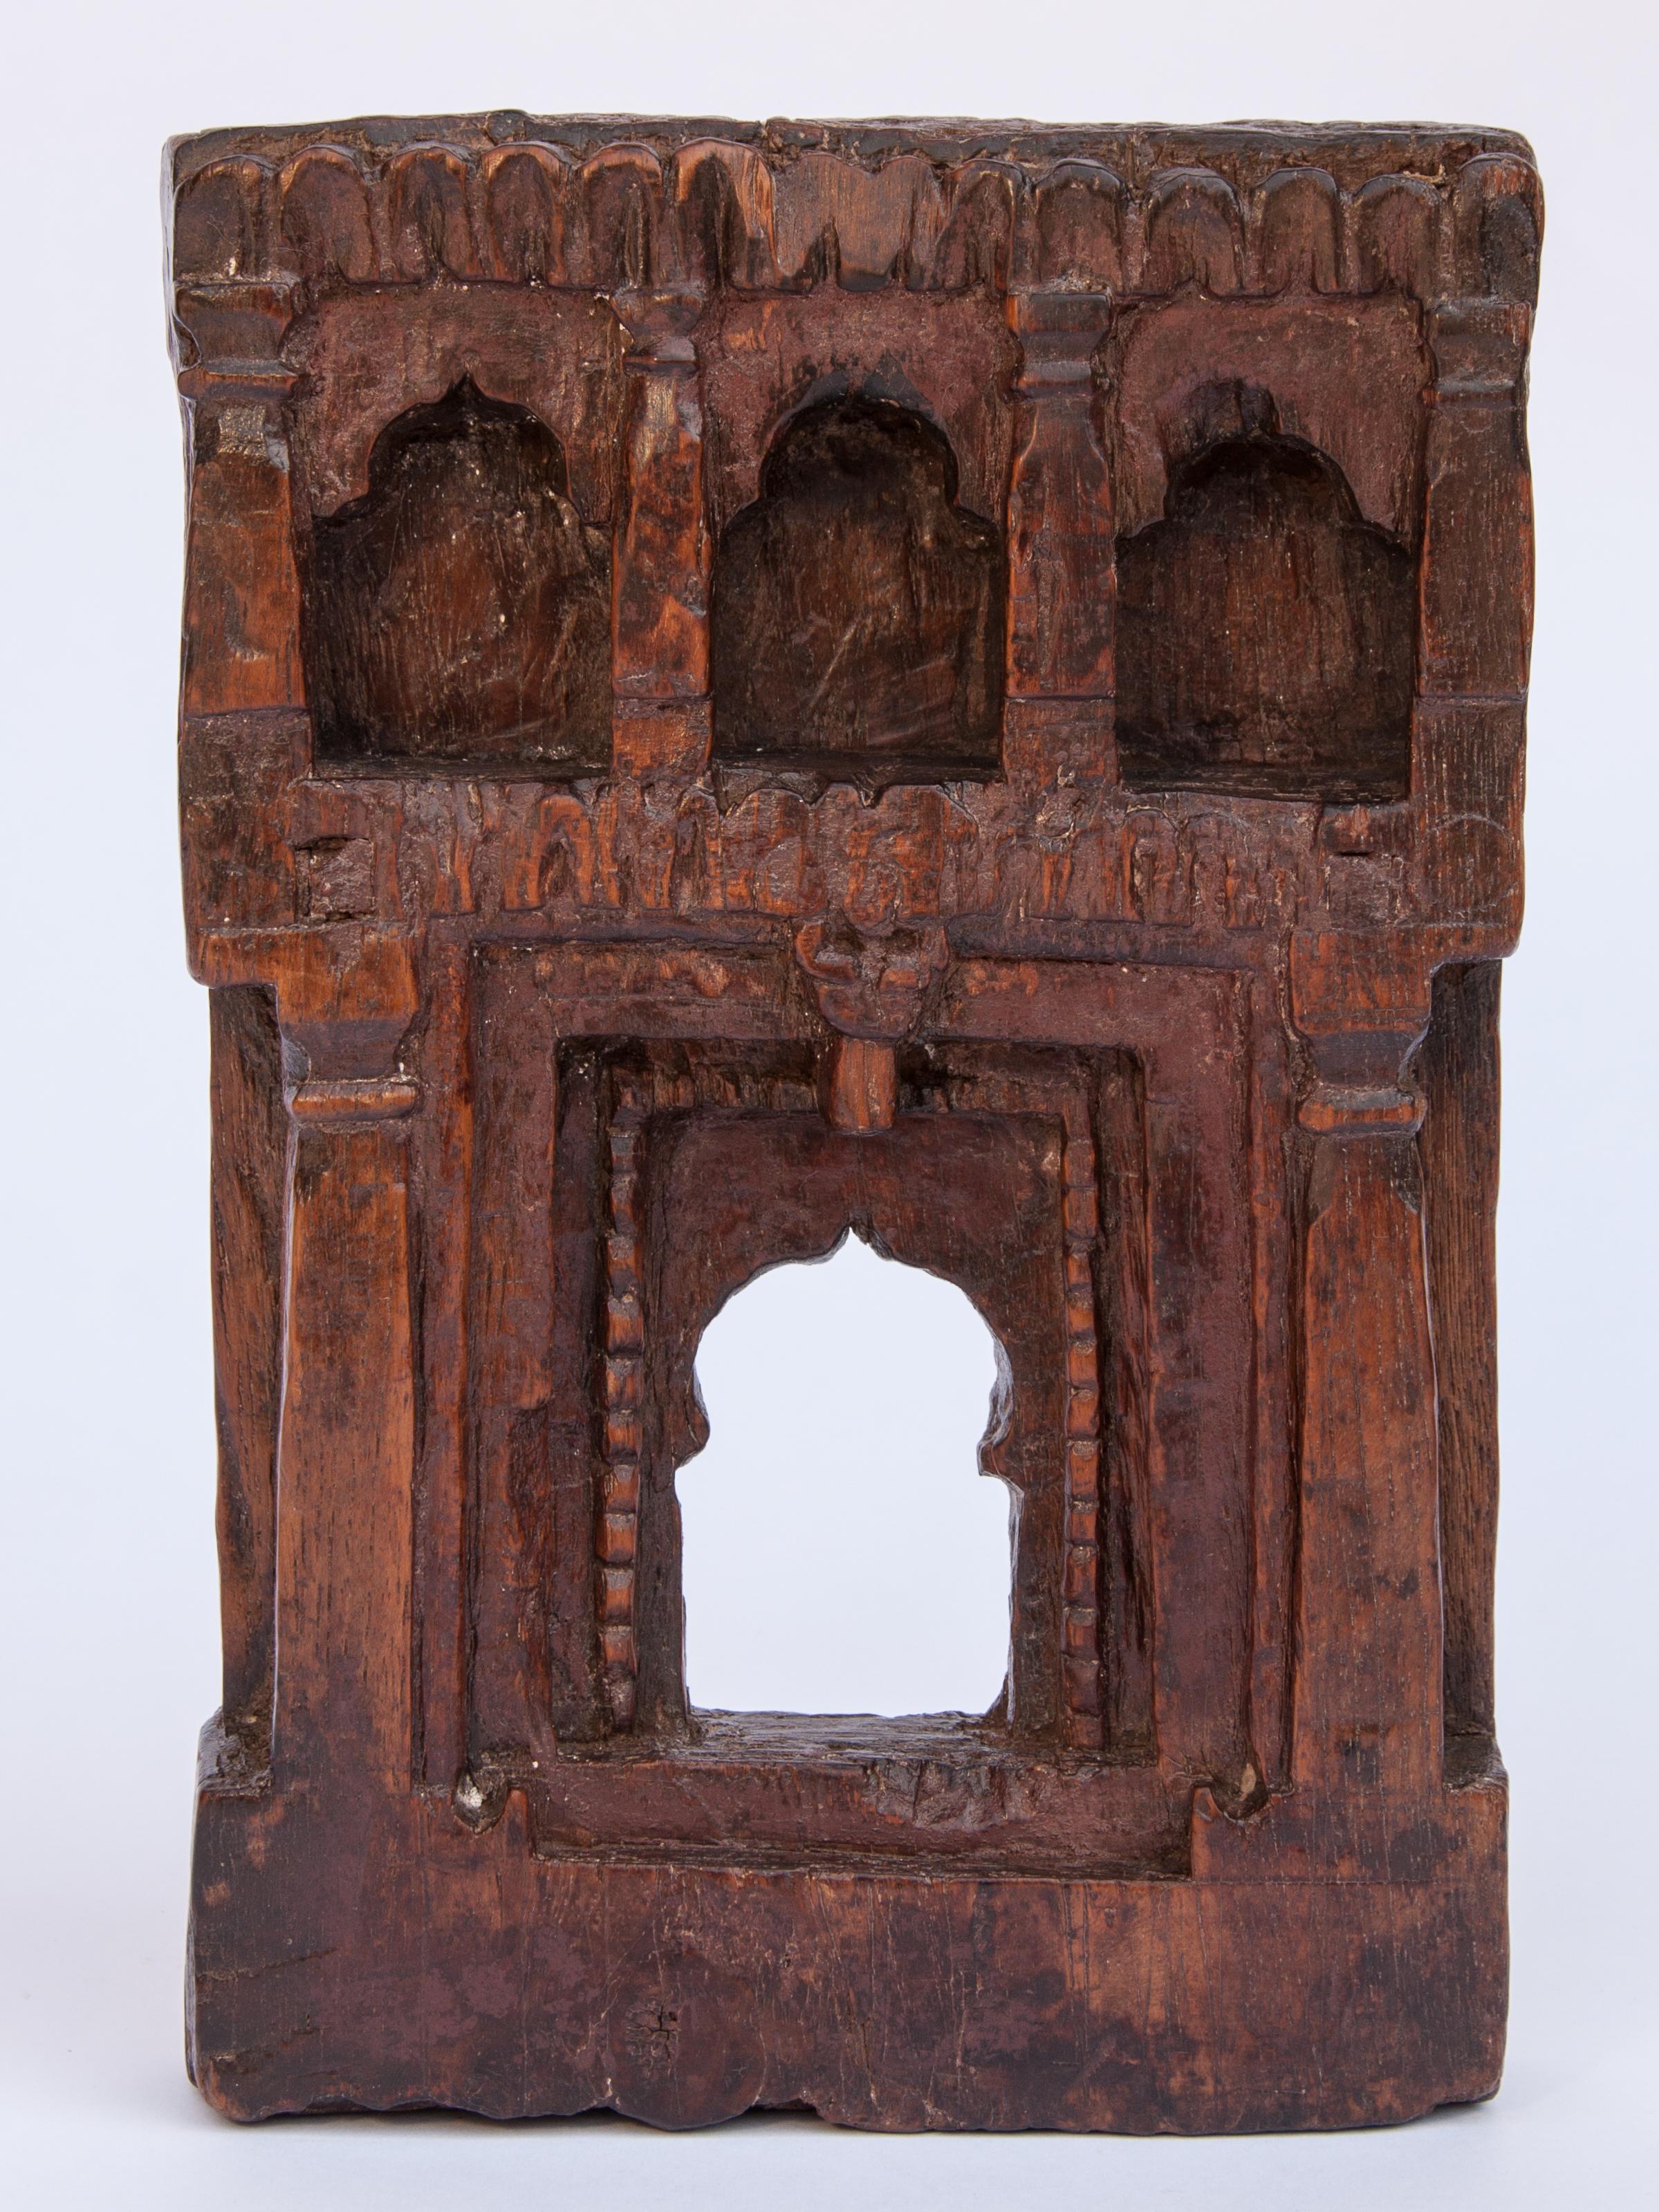 Vintage miniature architectural votive or picture frame. Mid-20th century, India. Wooden, hand carved, mid-20th century. Measures approx: 6 inches wide x 9.5 inches high. 
This vintage hand carved wooden frame, from South India, is basically a